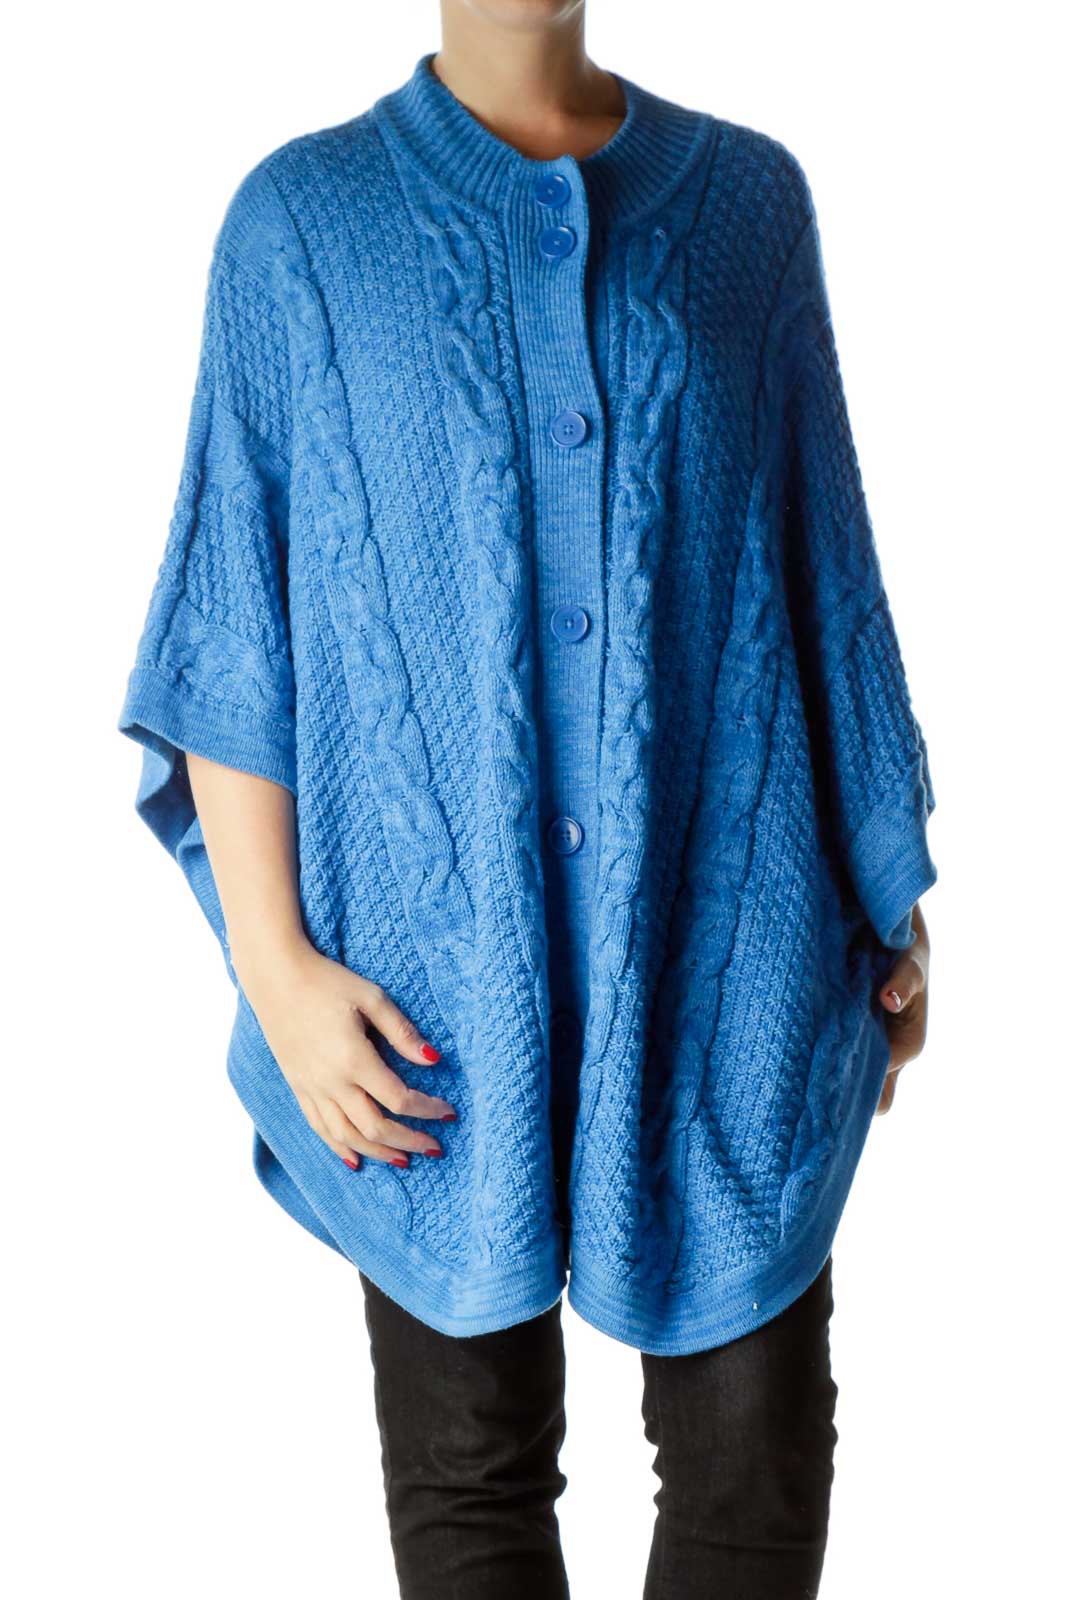 Blue Bat-Sleeve Cable Knit Sweater Front